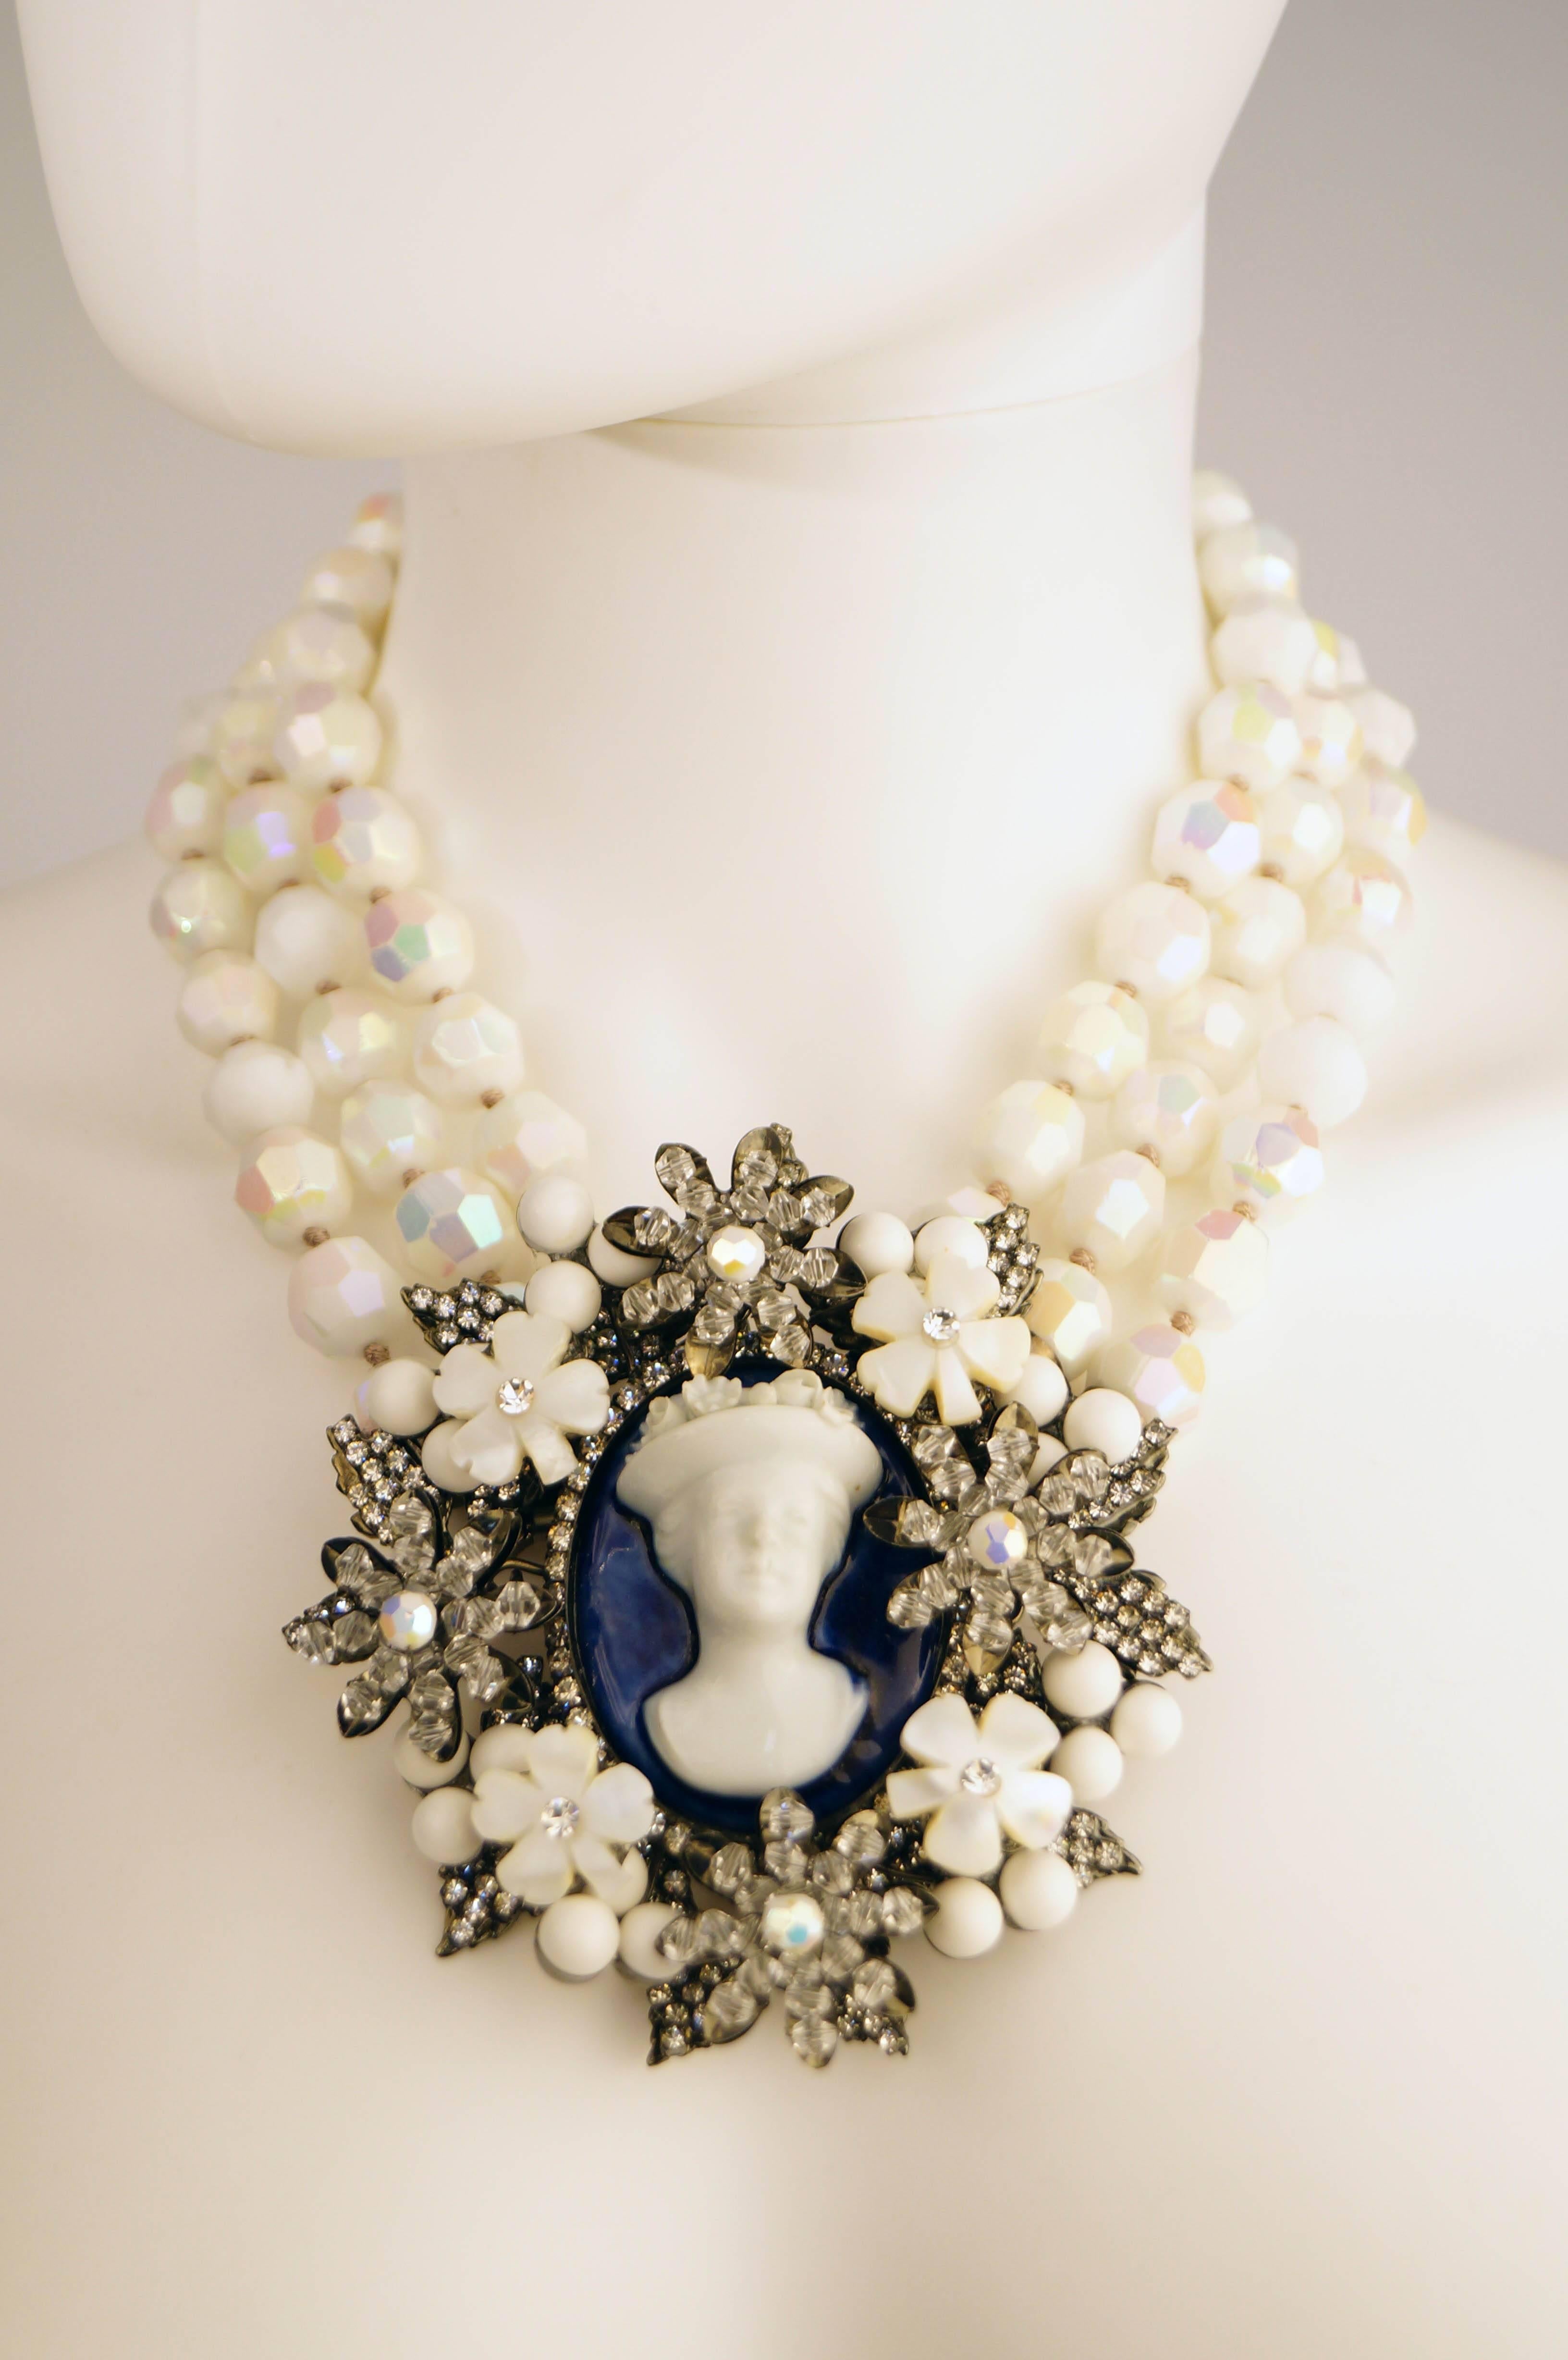 Late 2oth Century Lawrence VRBA Convertible Cameo Brooch Necklace  In Excellent Condition For Sale In Houston, TX